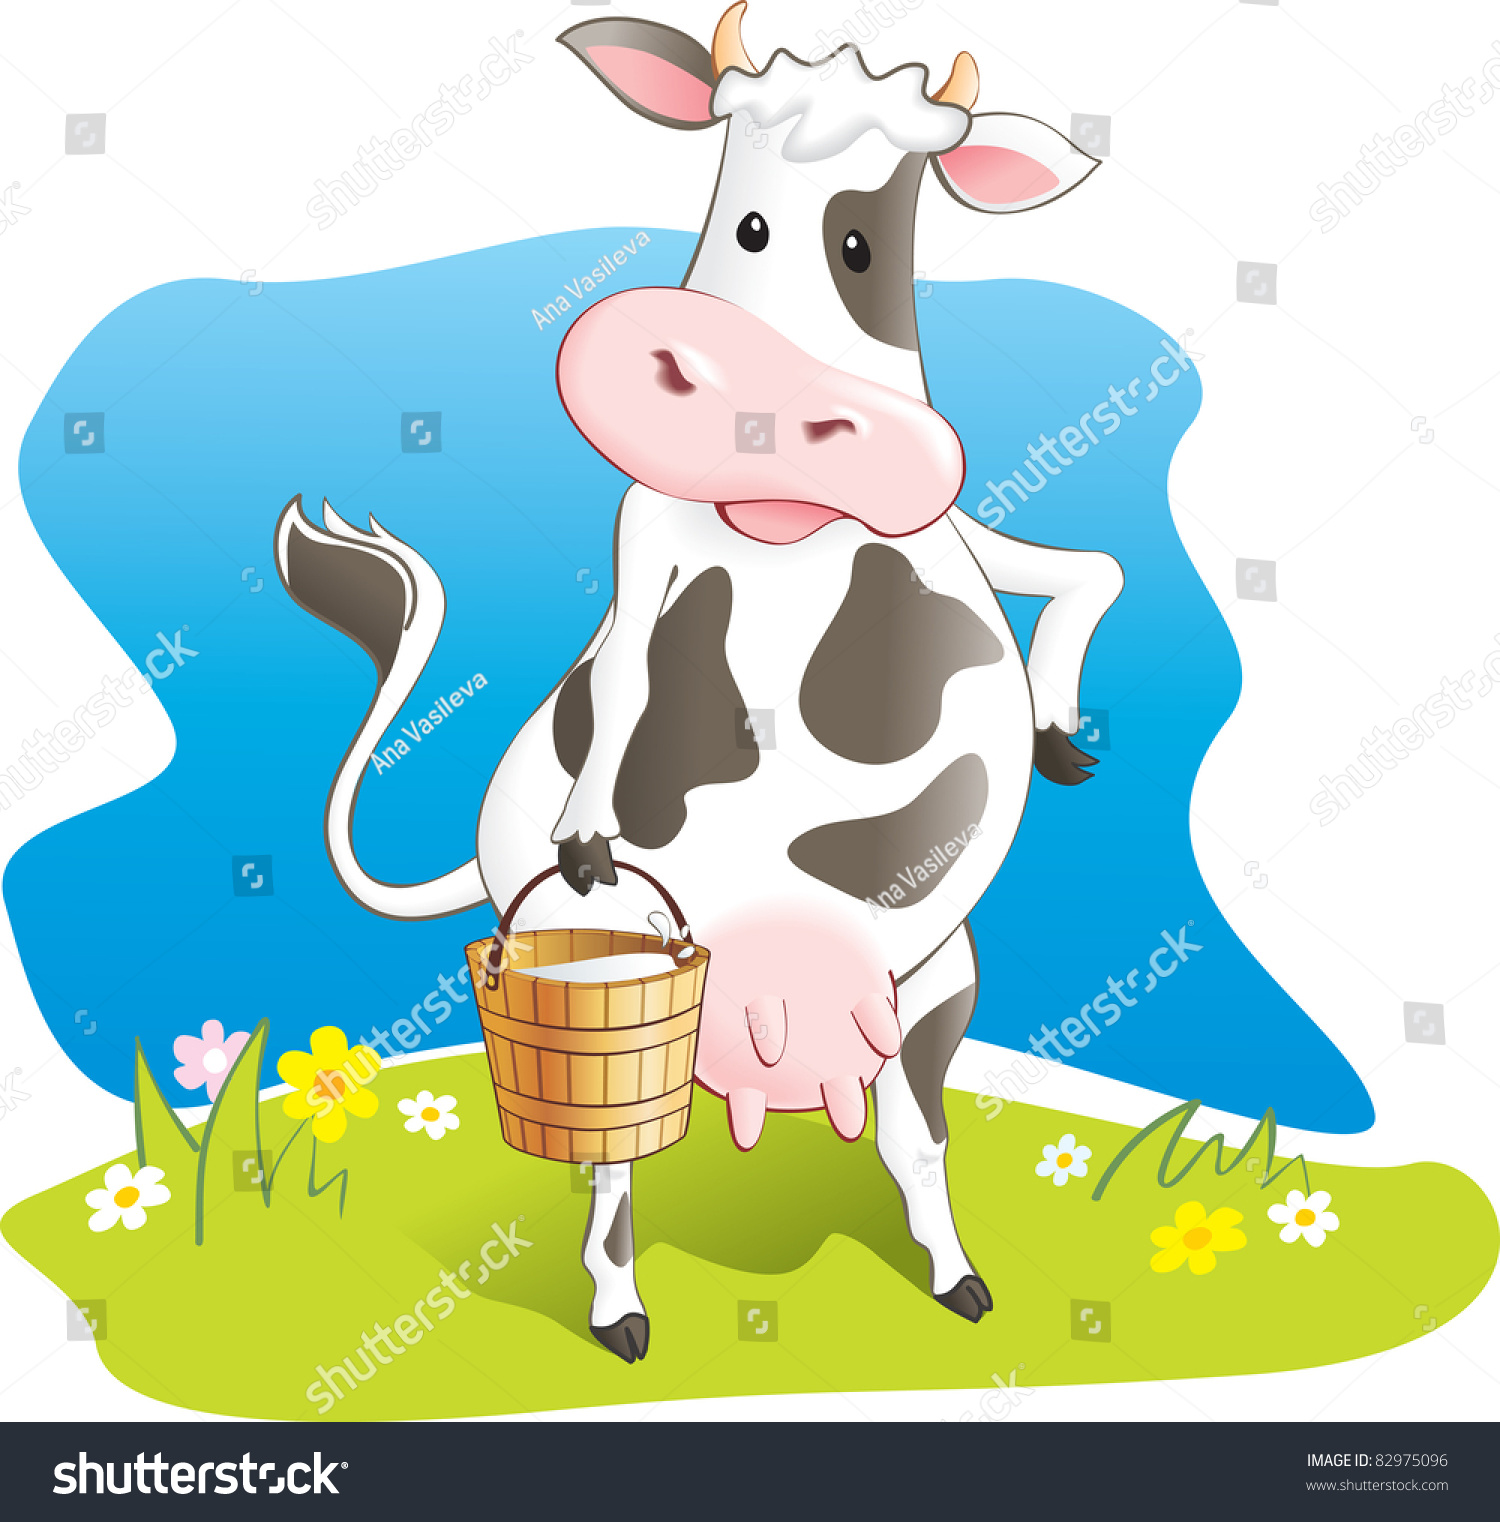 Funny Cow Carry Wooden Pail Milk Stock Vector 82975096 ...